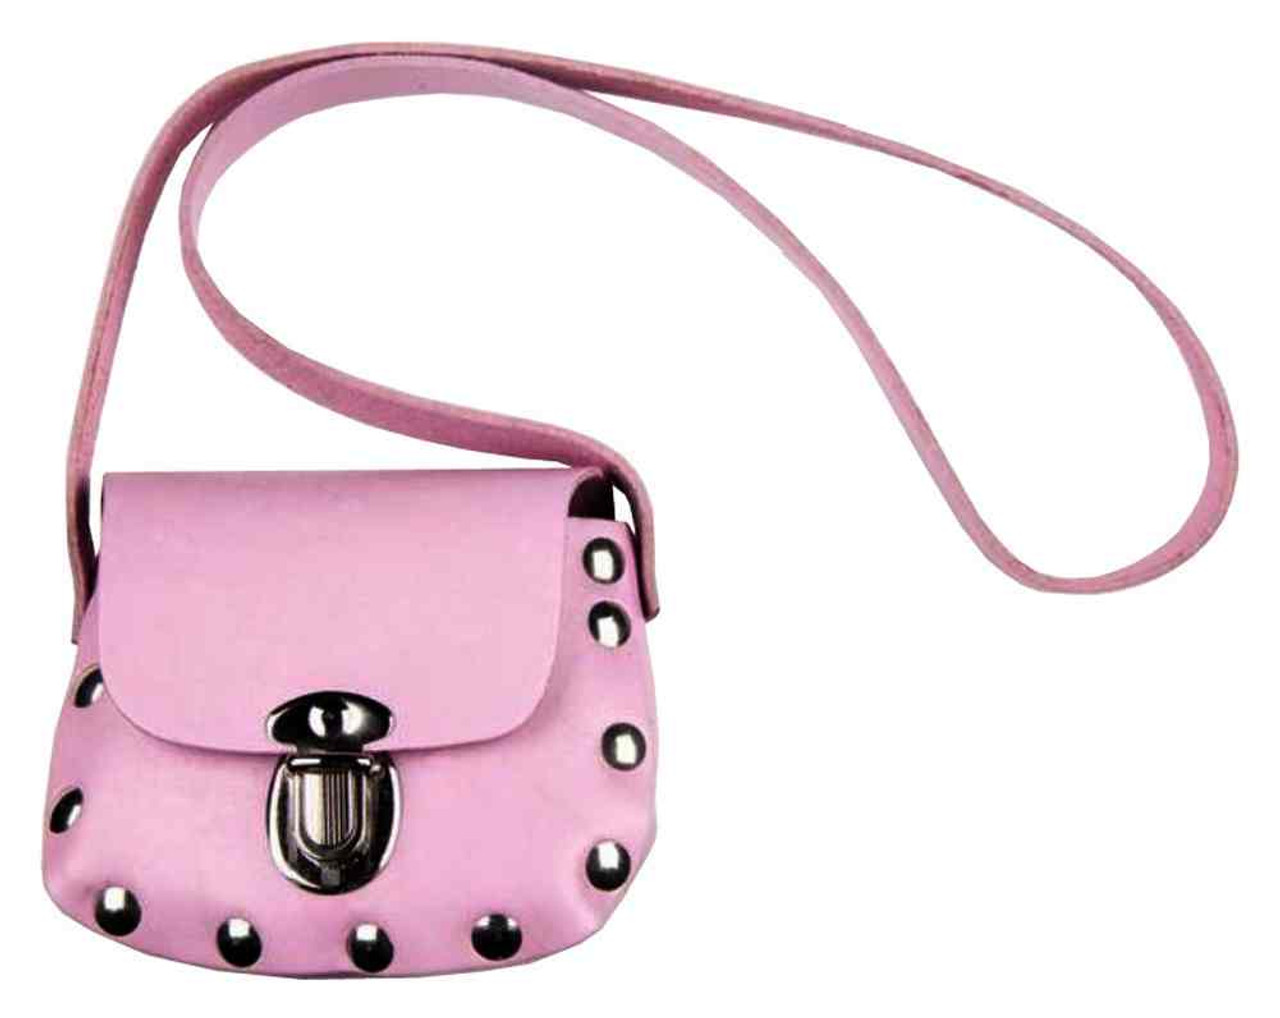 Louis Cardy Hand Bag Shoulder Bag In Pink Size 14”X11”